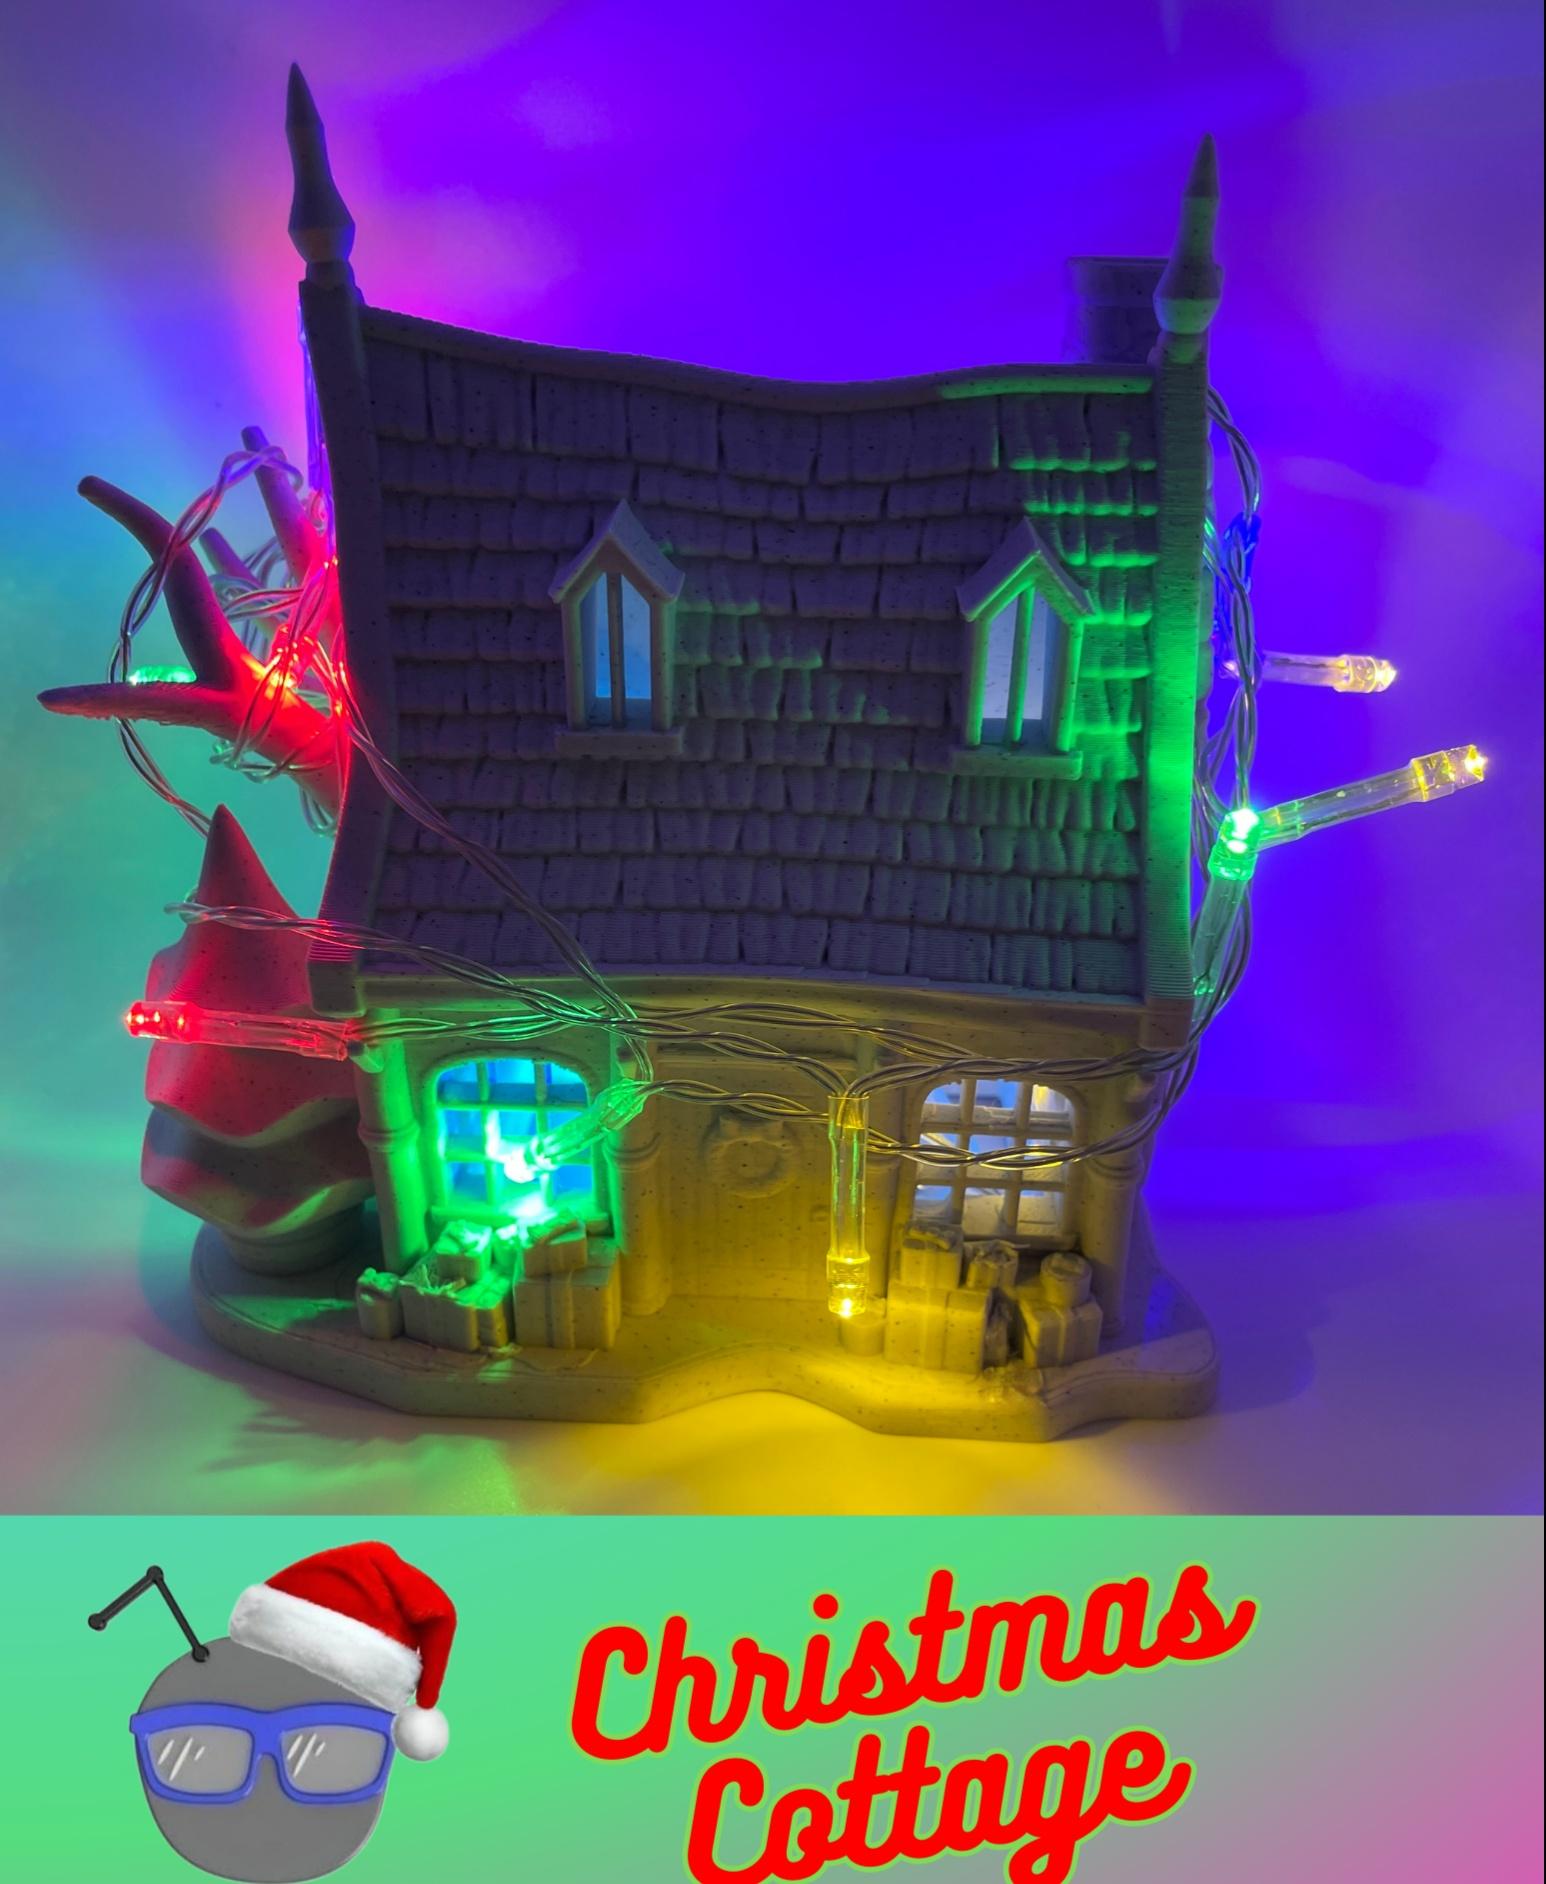 The Christmas Cottage - I will be painting this on a stream soon! - 3d model